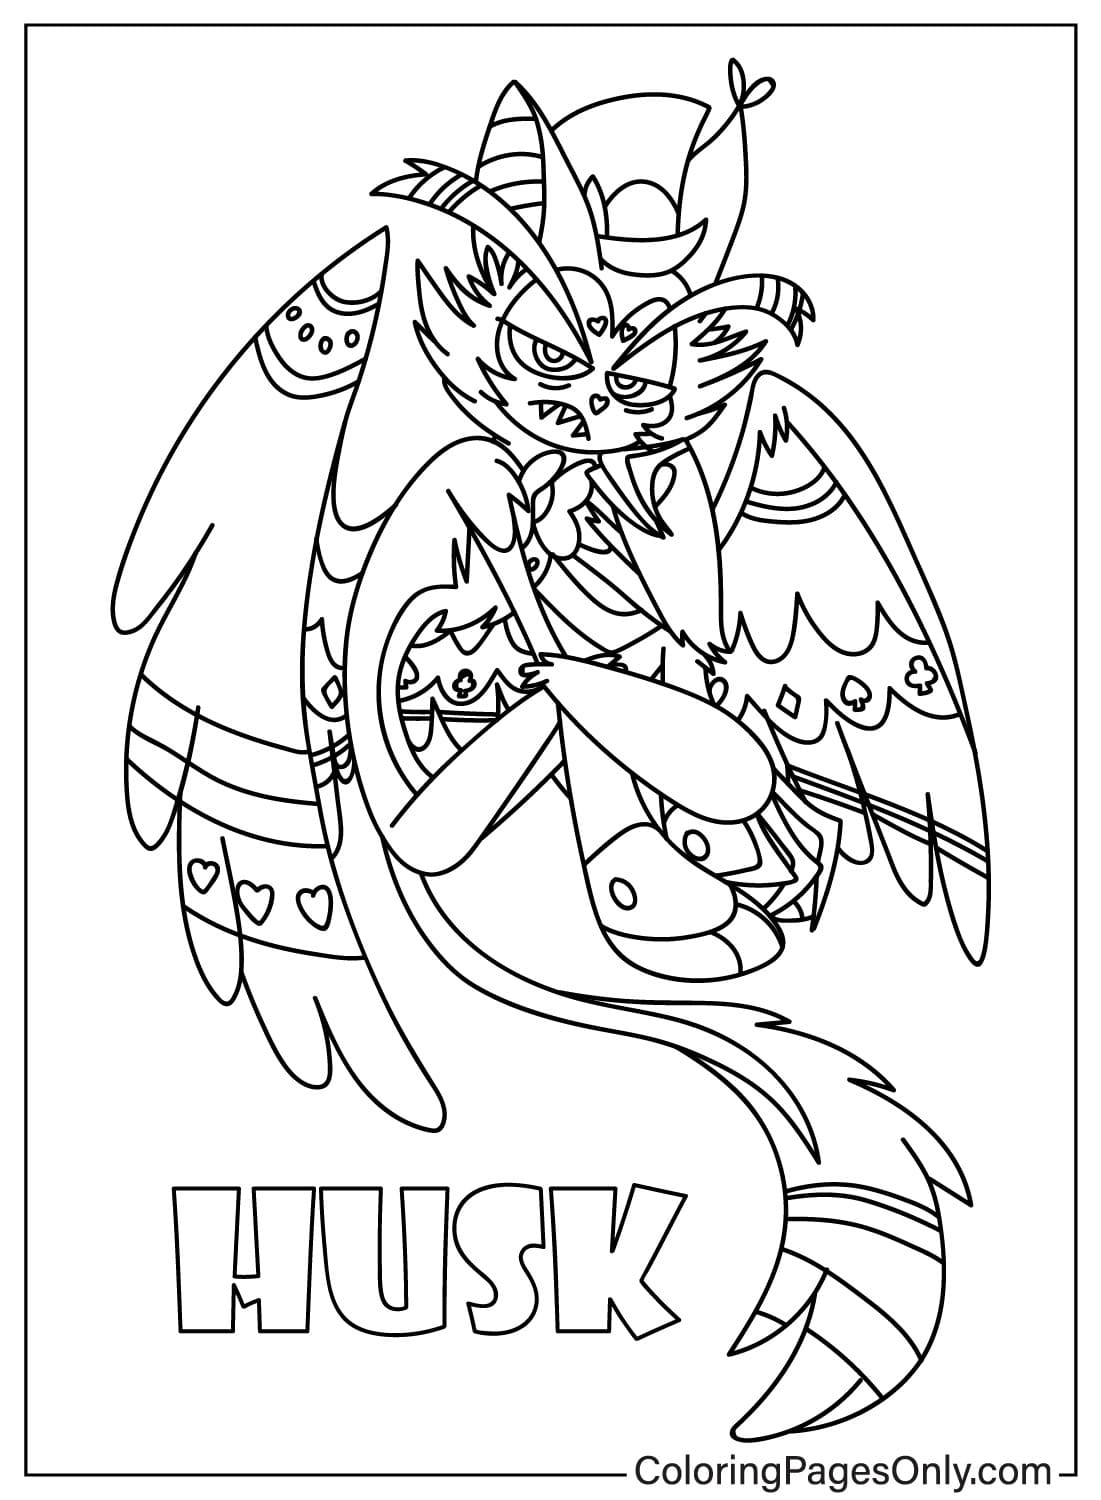 Husk Coloring Page from Hazbin Hotel